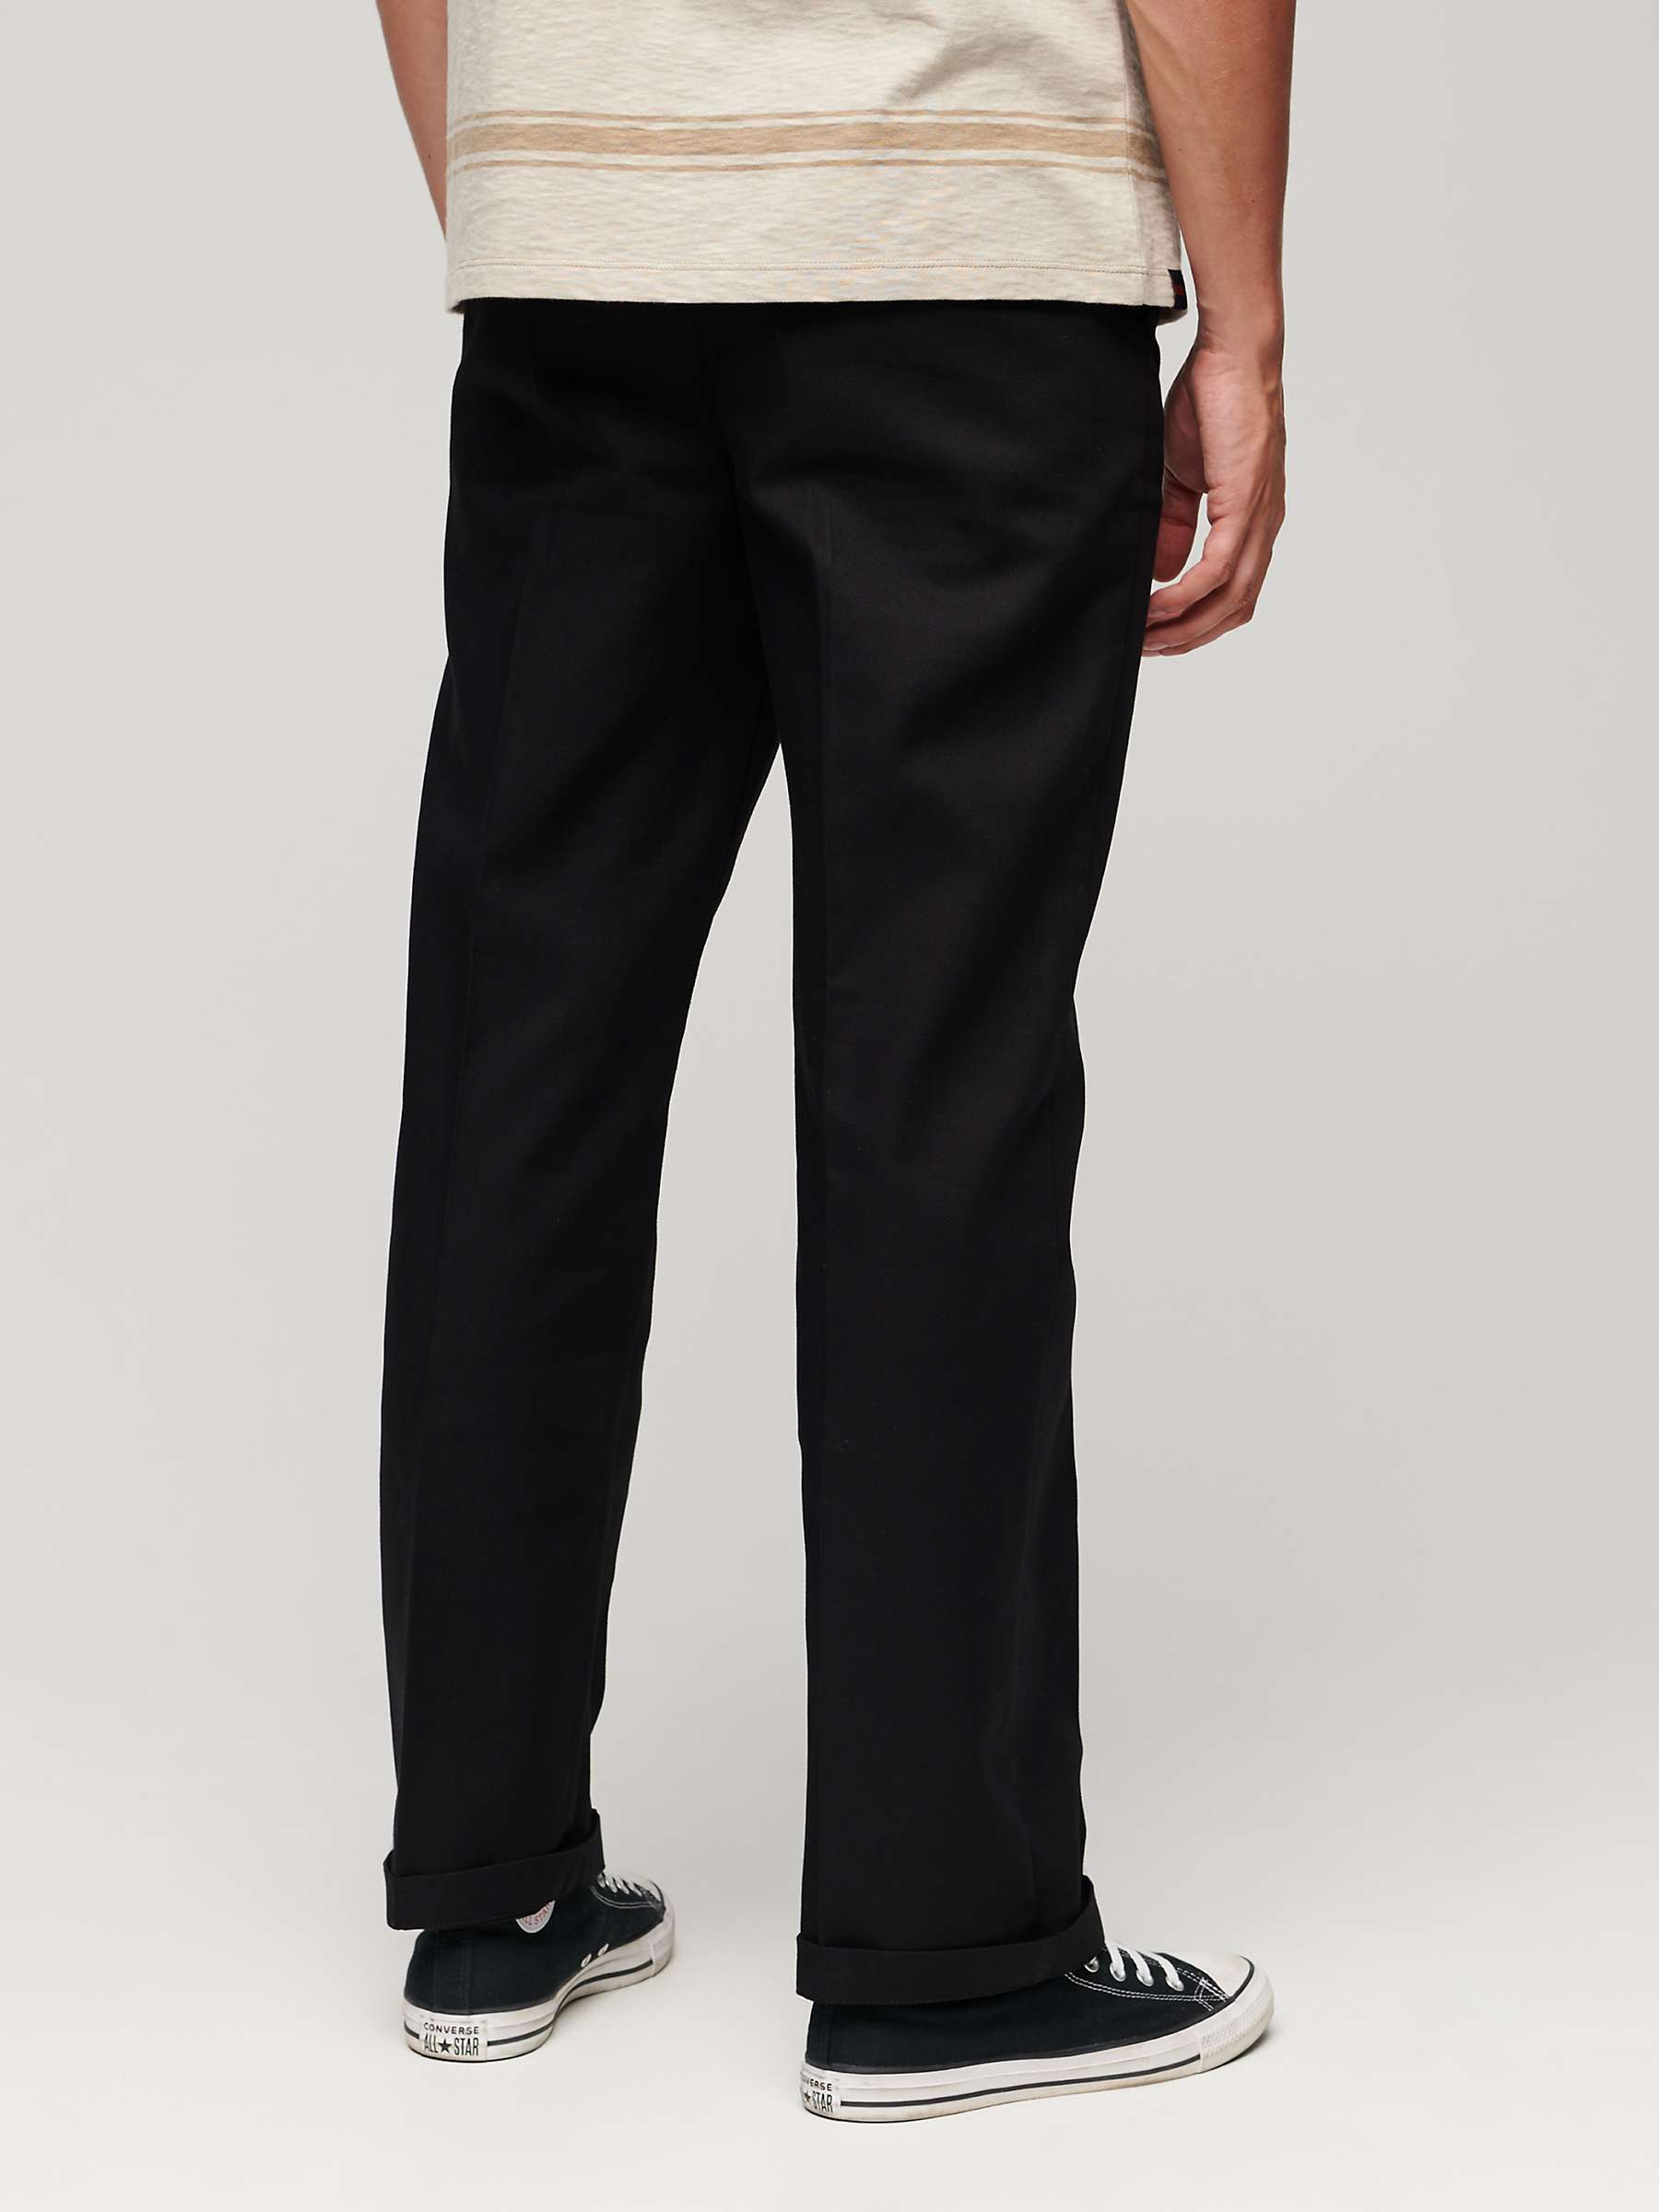 Buy Superdry Straight Chino Trousers, Black Online at johnlewis.com